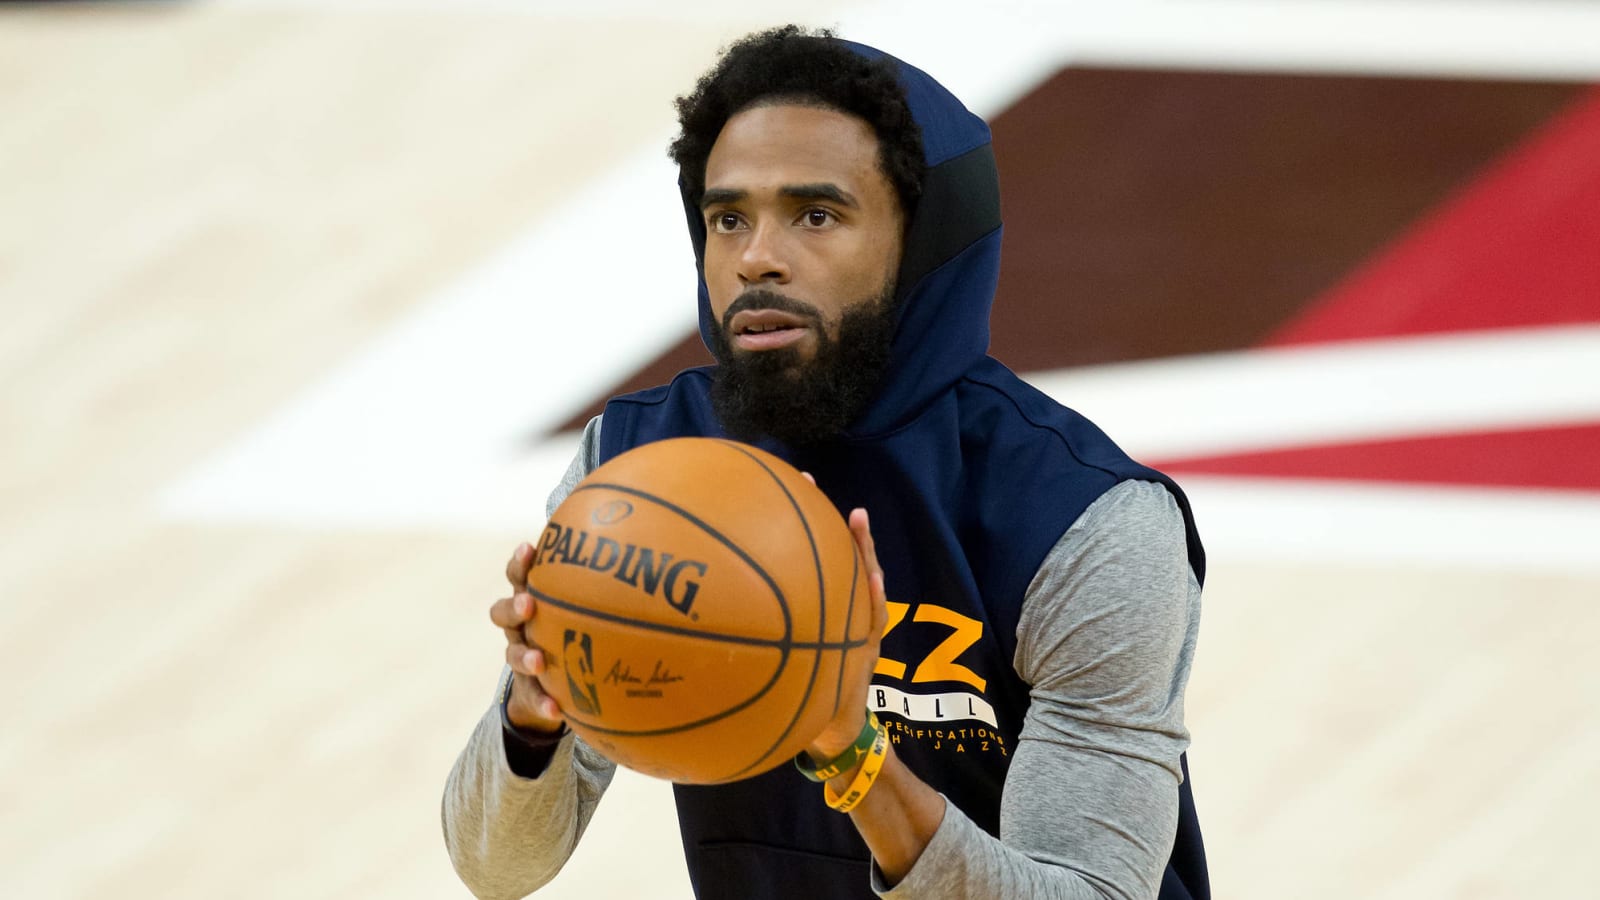 Jazz considered likely to re-sign All-Star PG Mike Conley